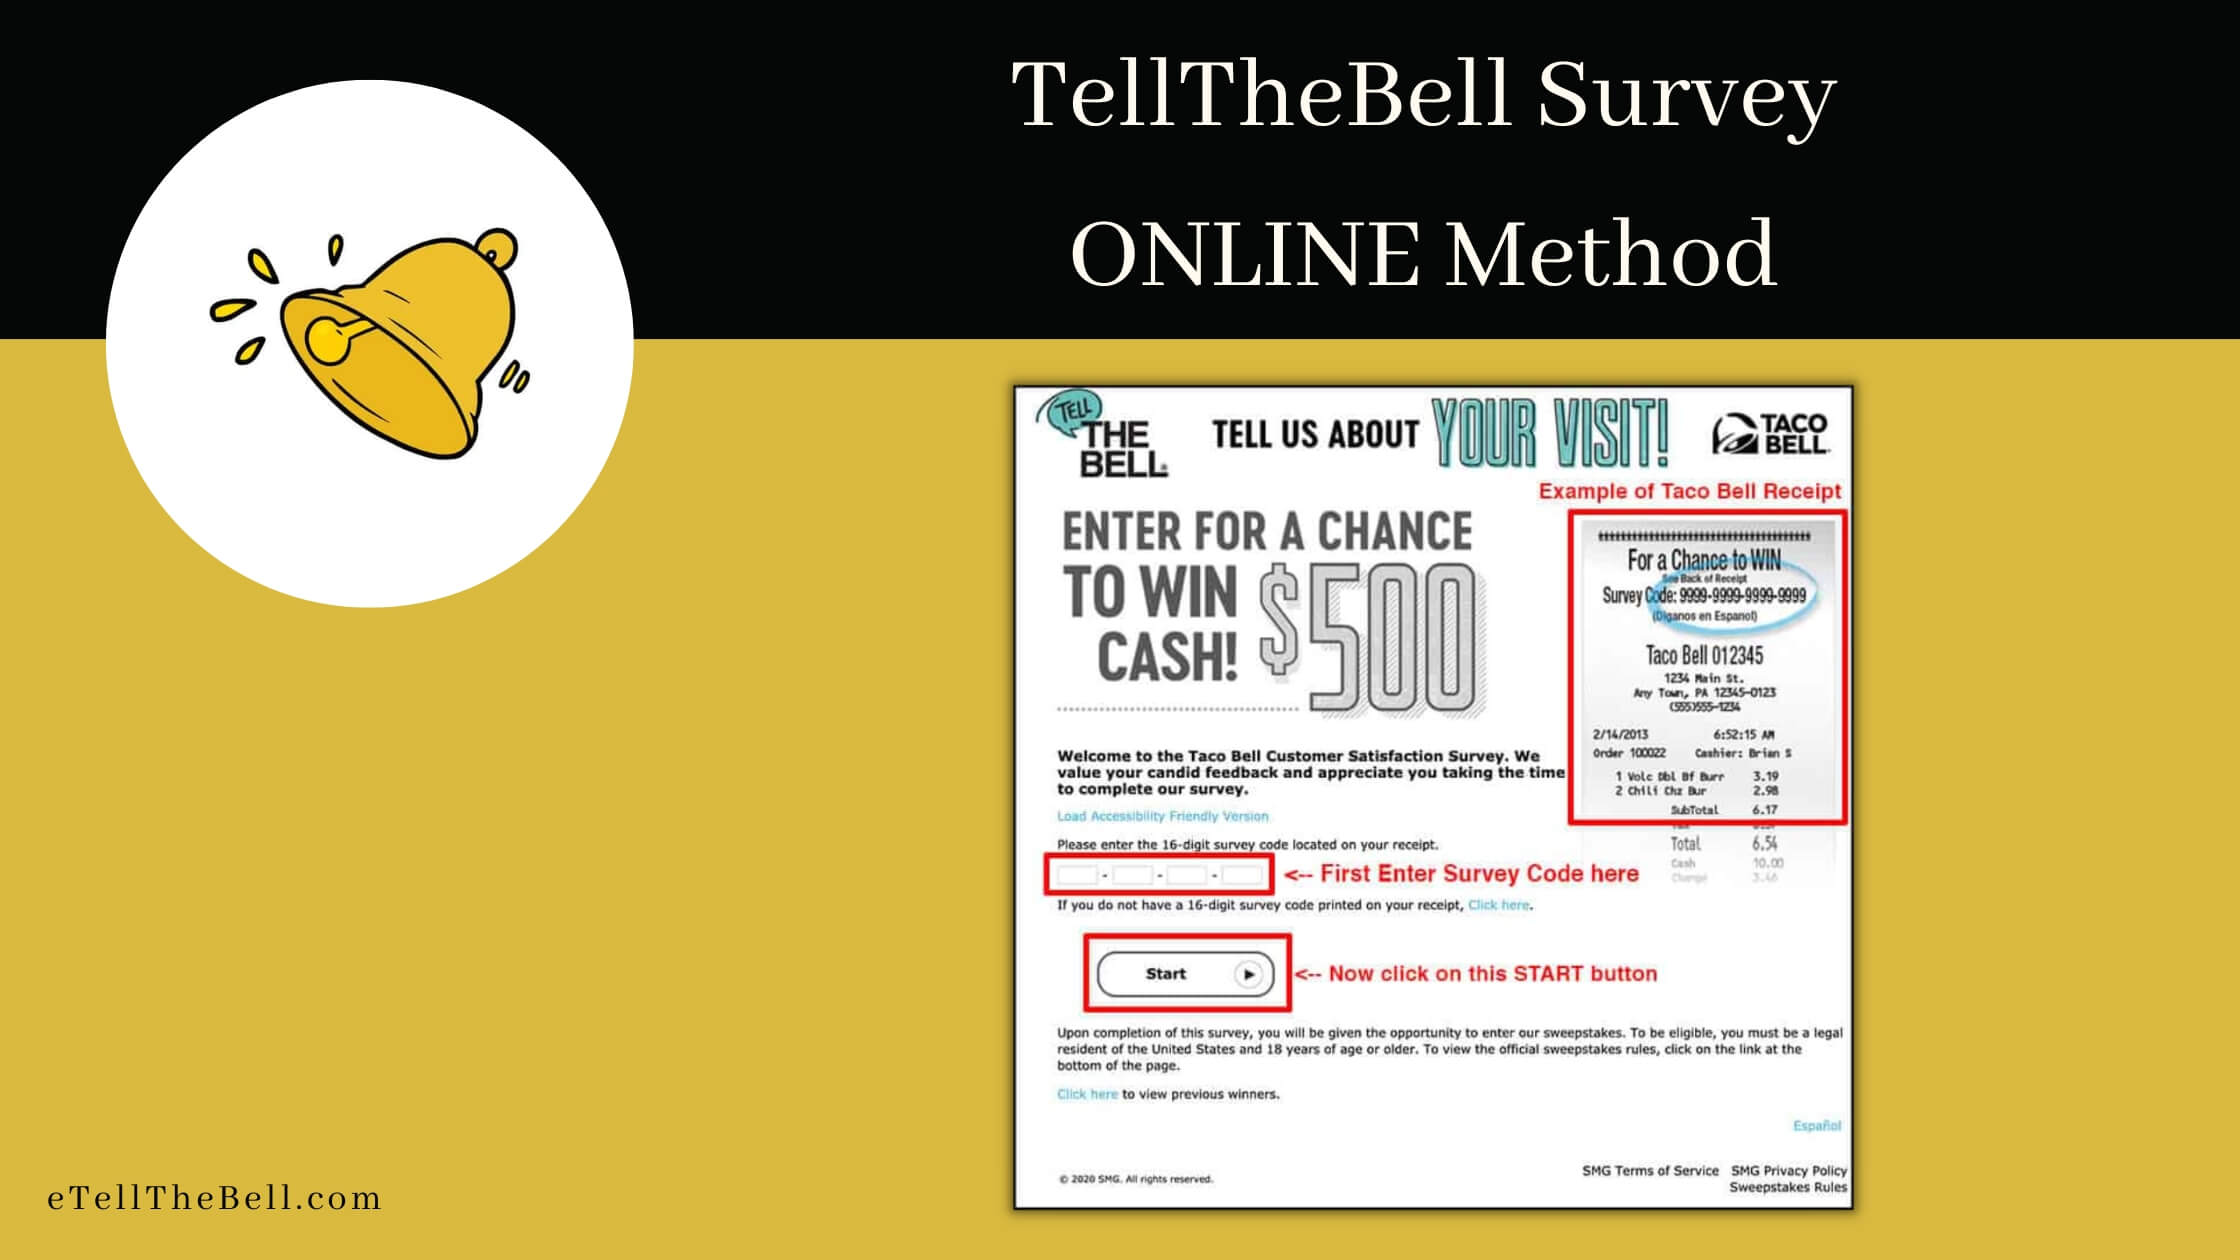 Enter the 16-digit Tell The Bell Survey Code printed on your Taco Bell purchase receipt